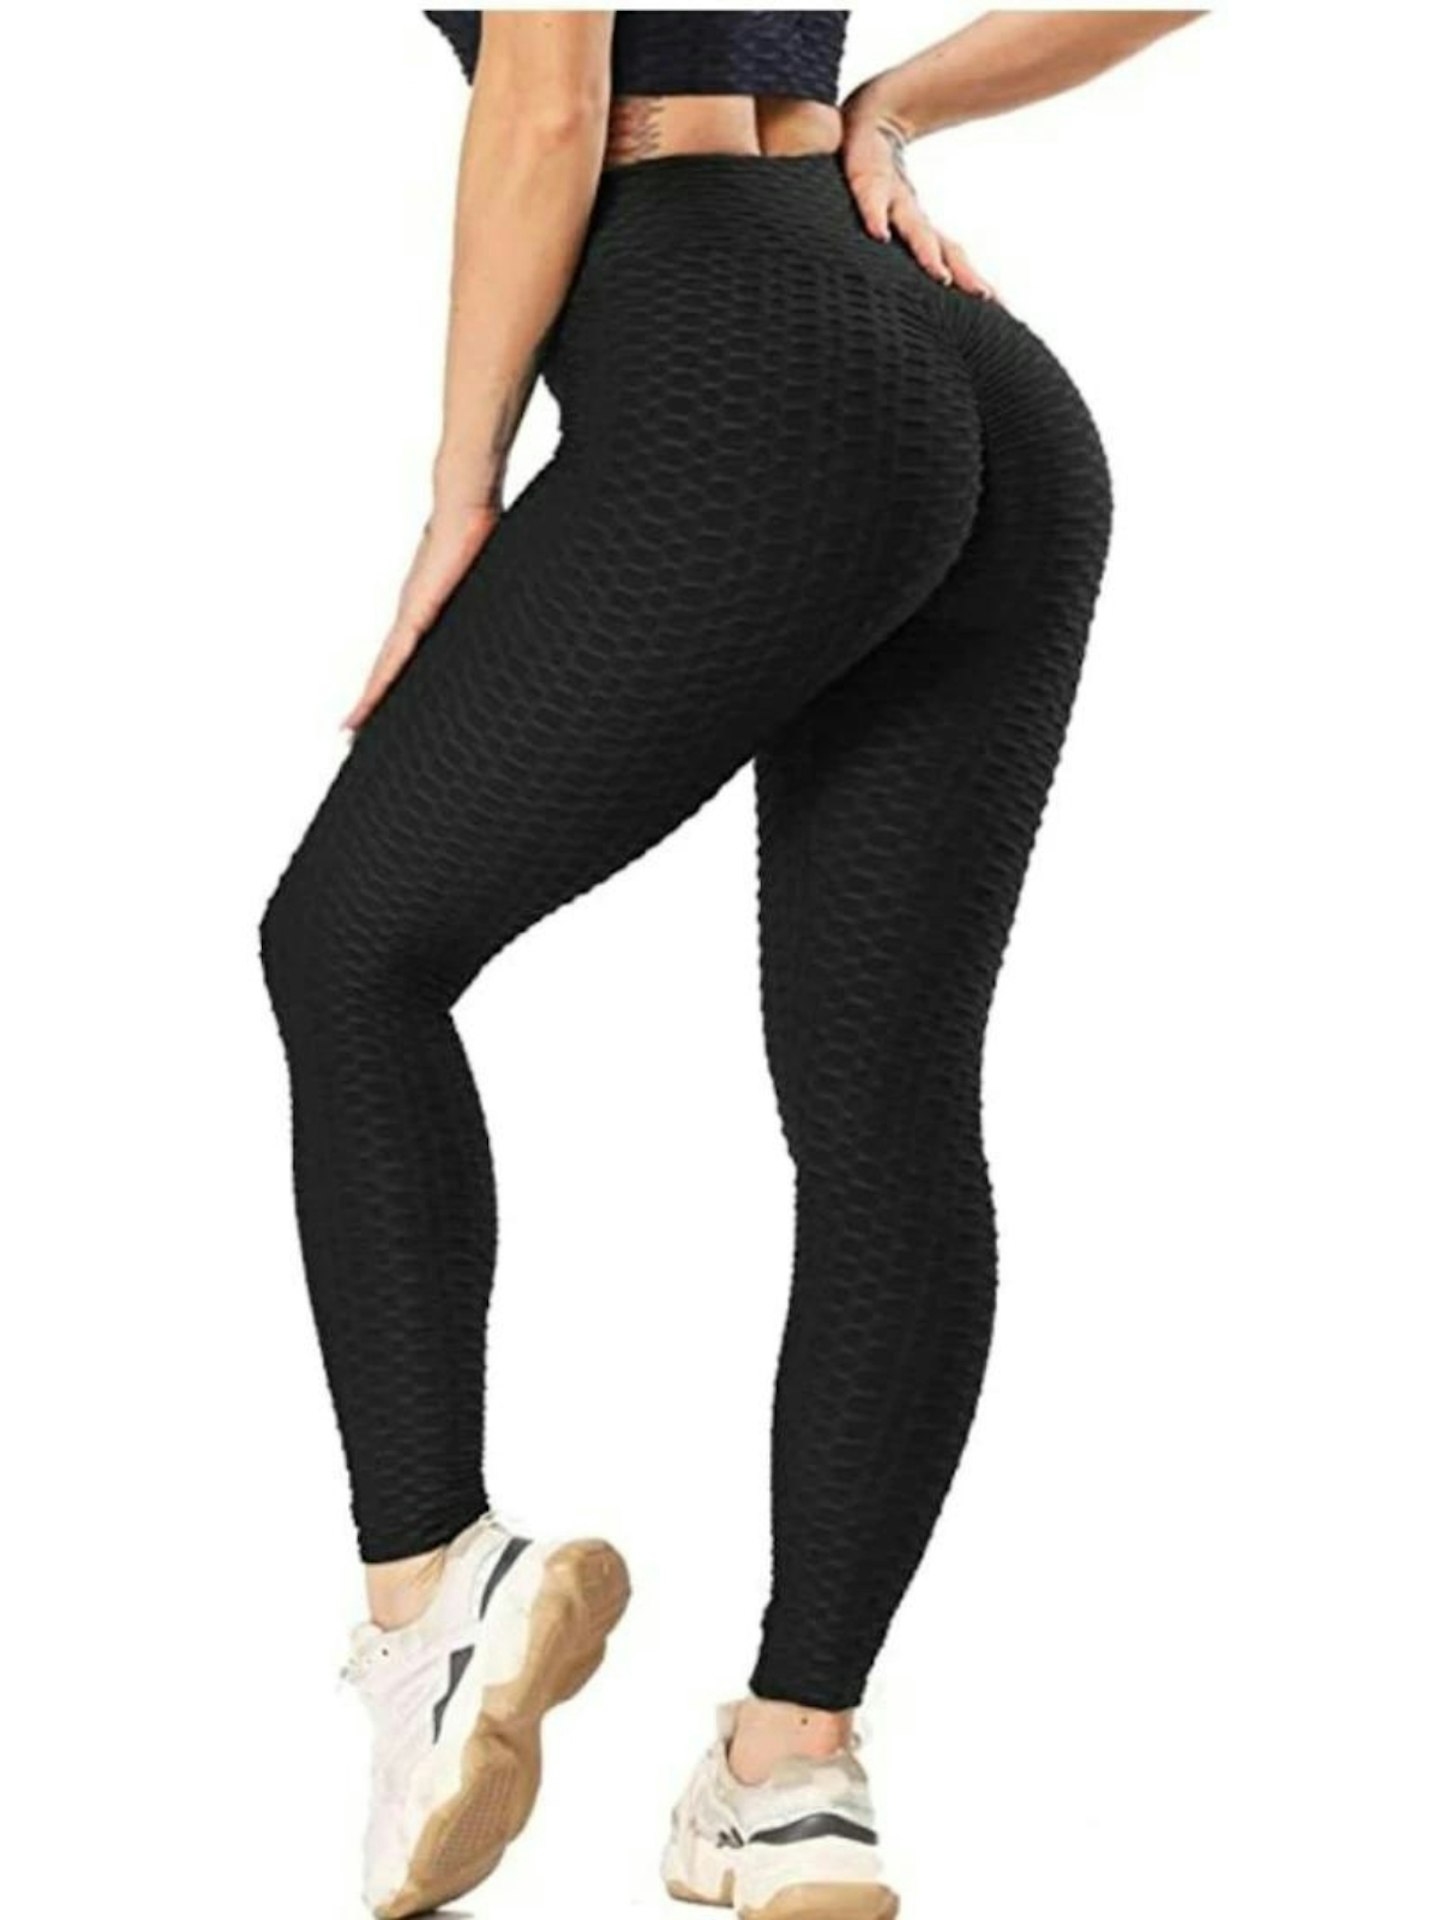 You do not want to miss out! The viral Scrunch Sculpt leggings are bac